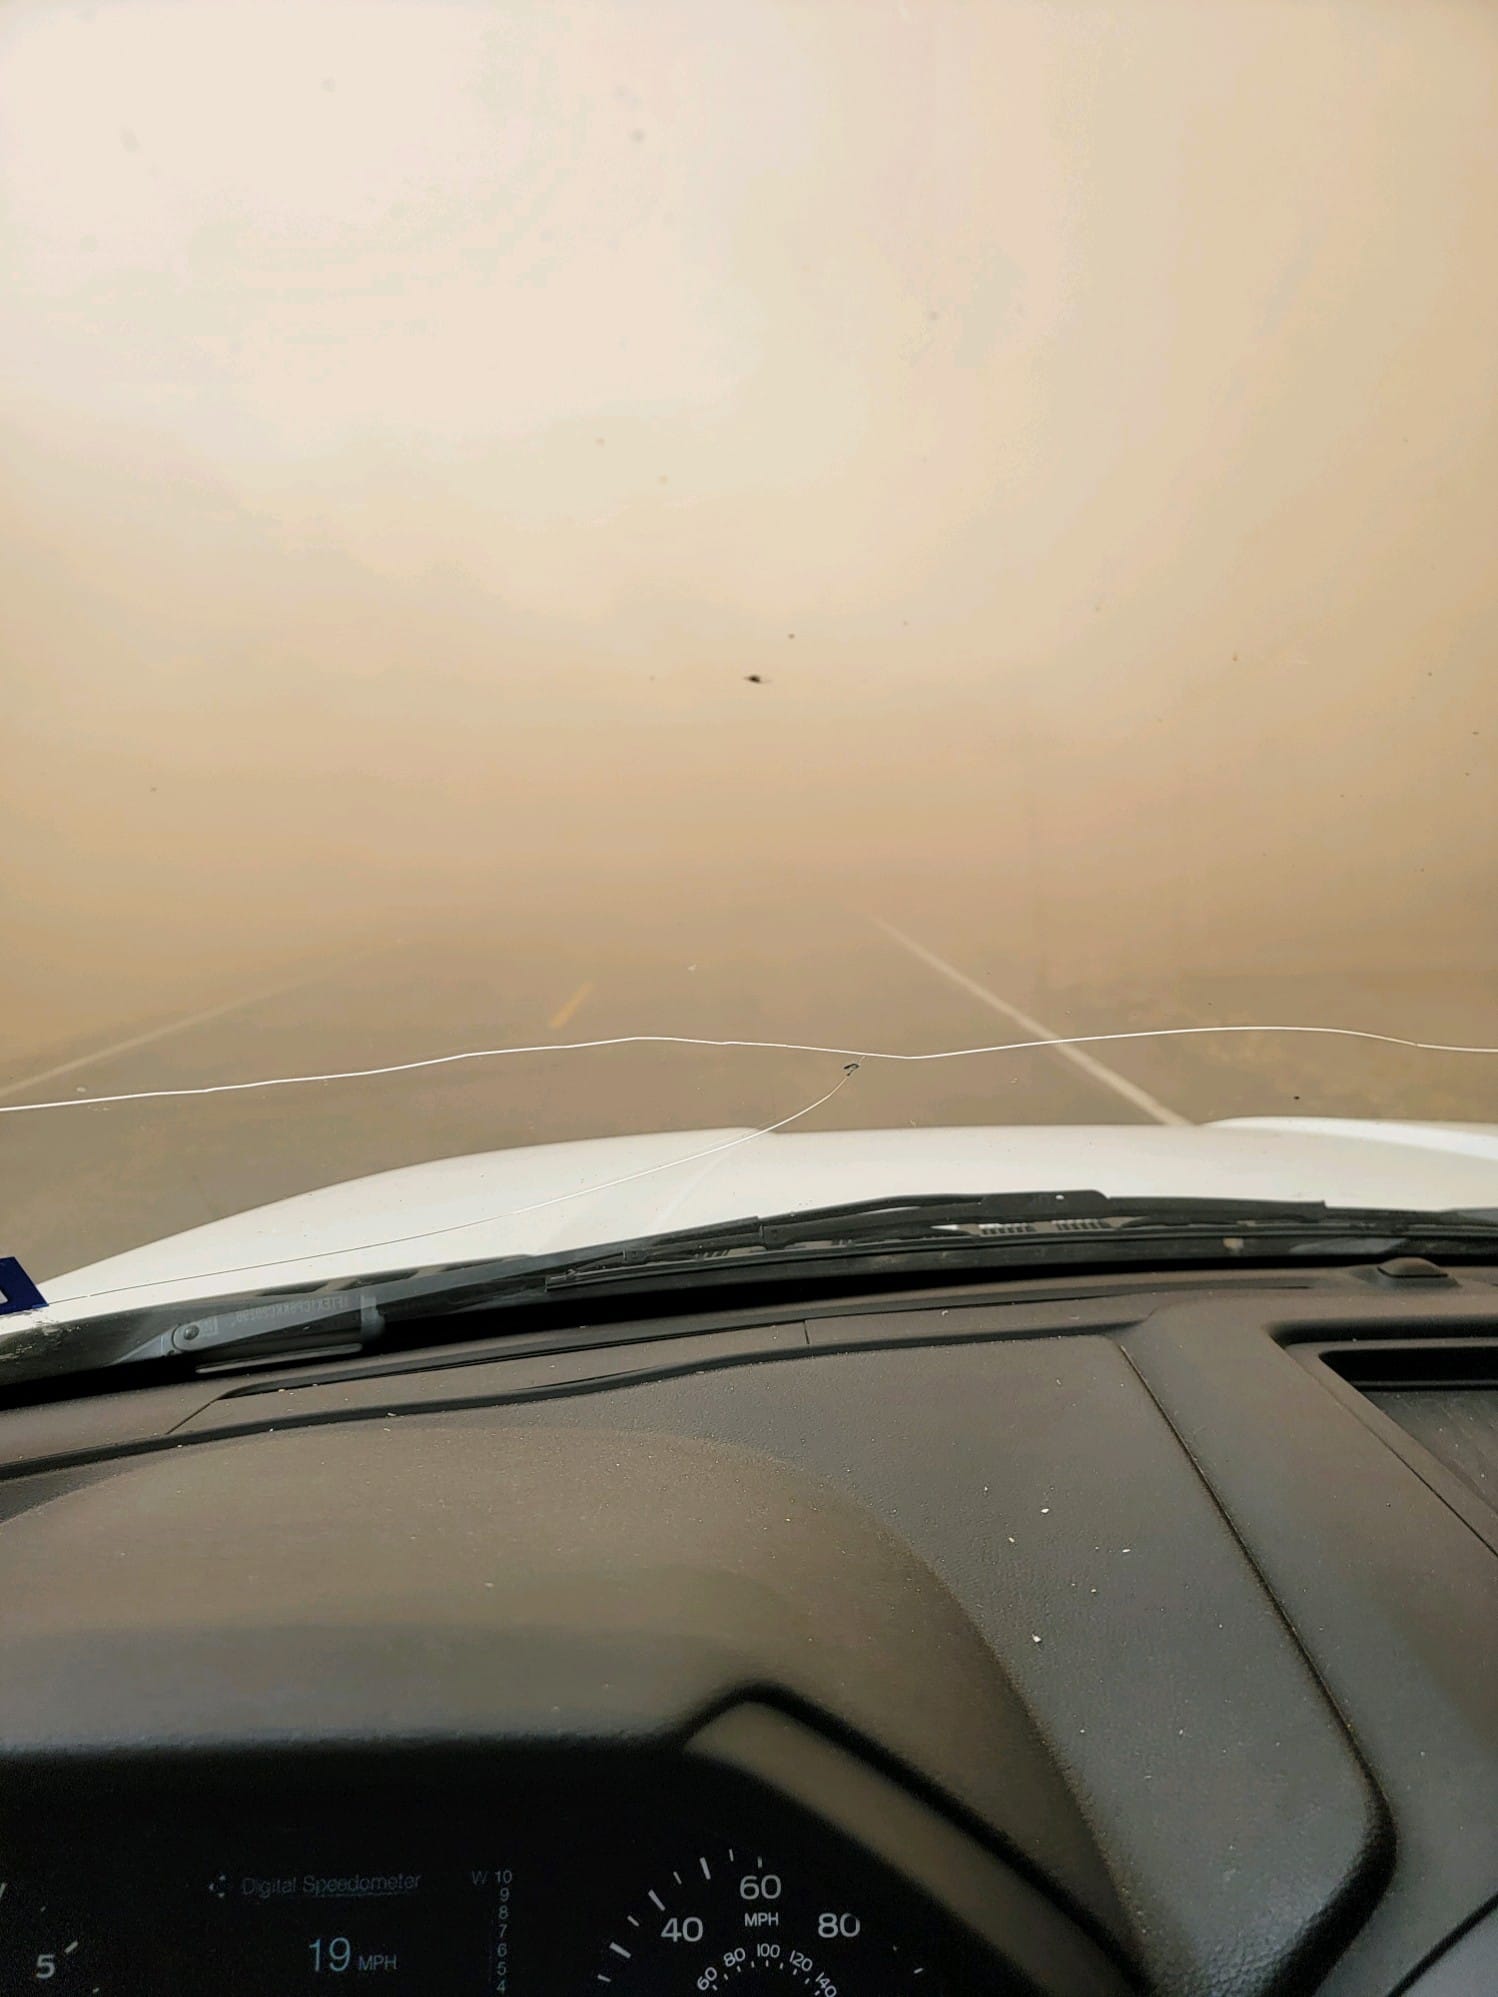 Photo by Dustin Sides Valdez of very low visibility due to blowing dust in Guymon, Oklahoma on February 14th, 2023